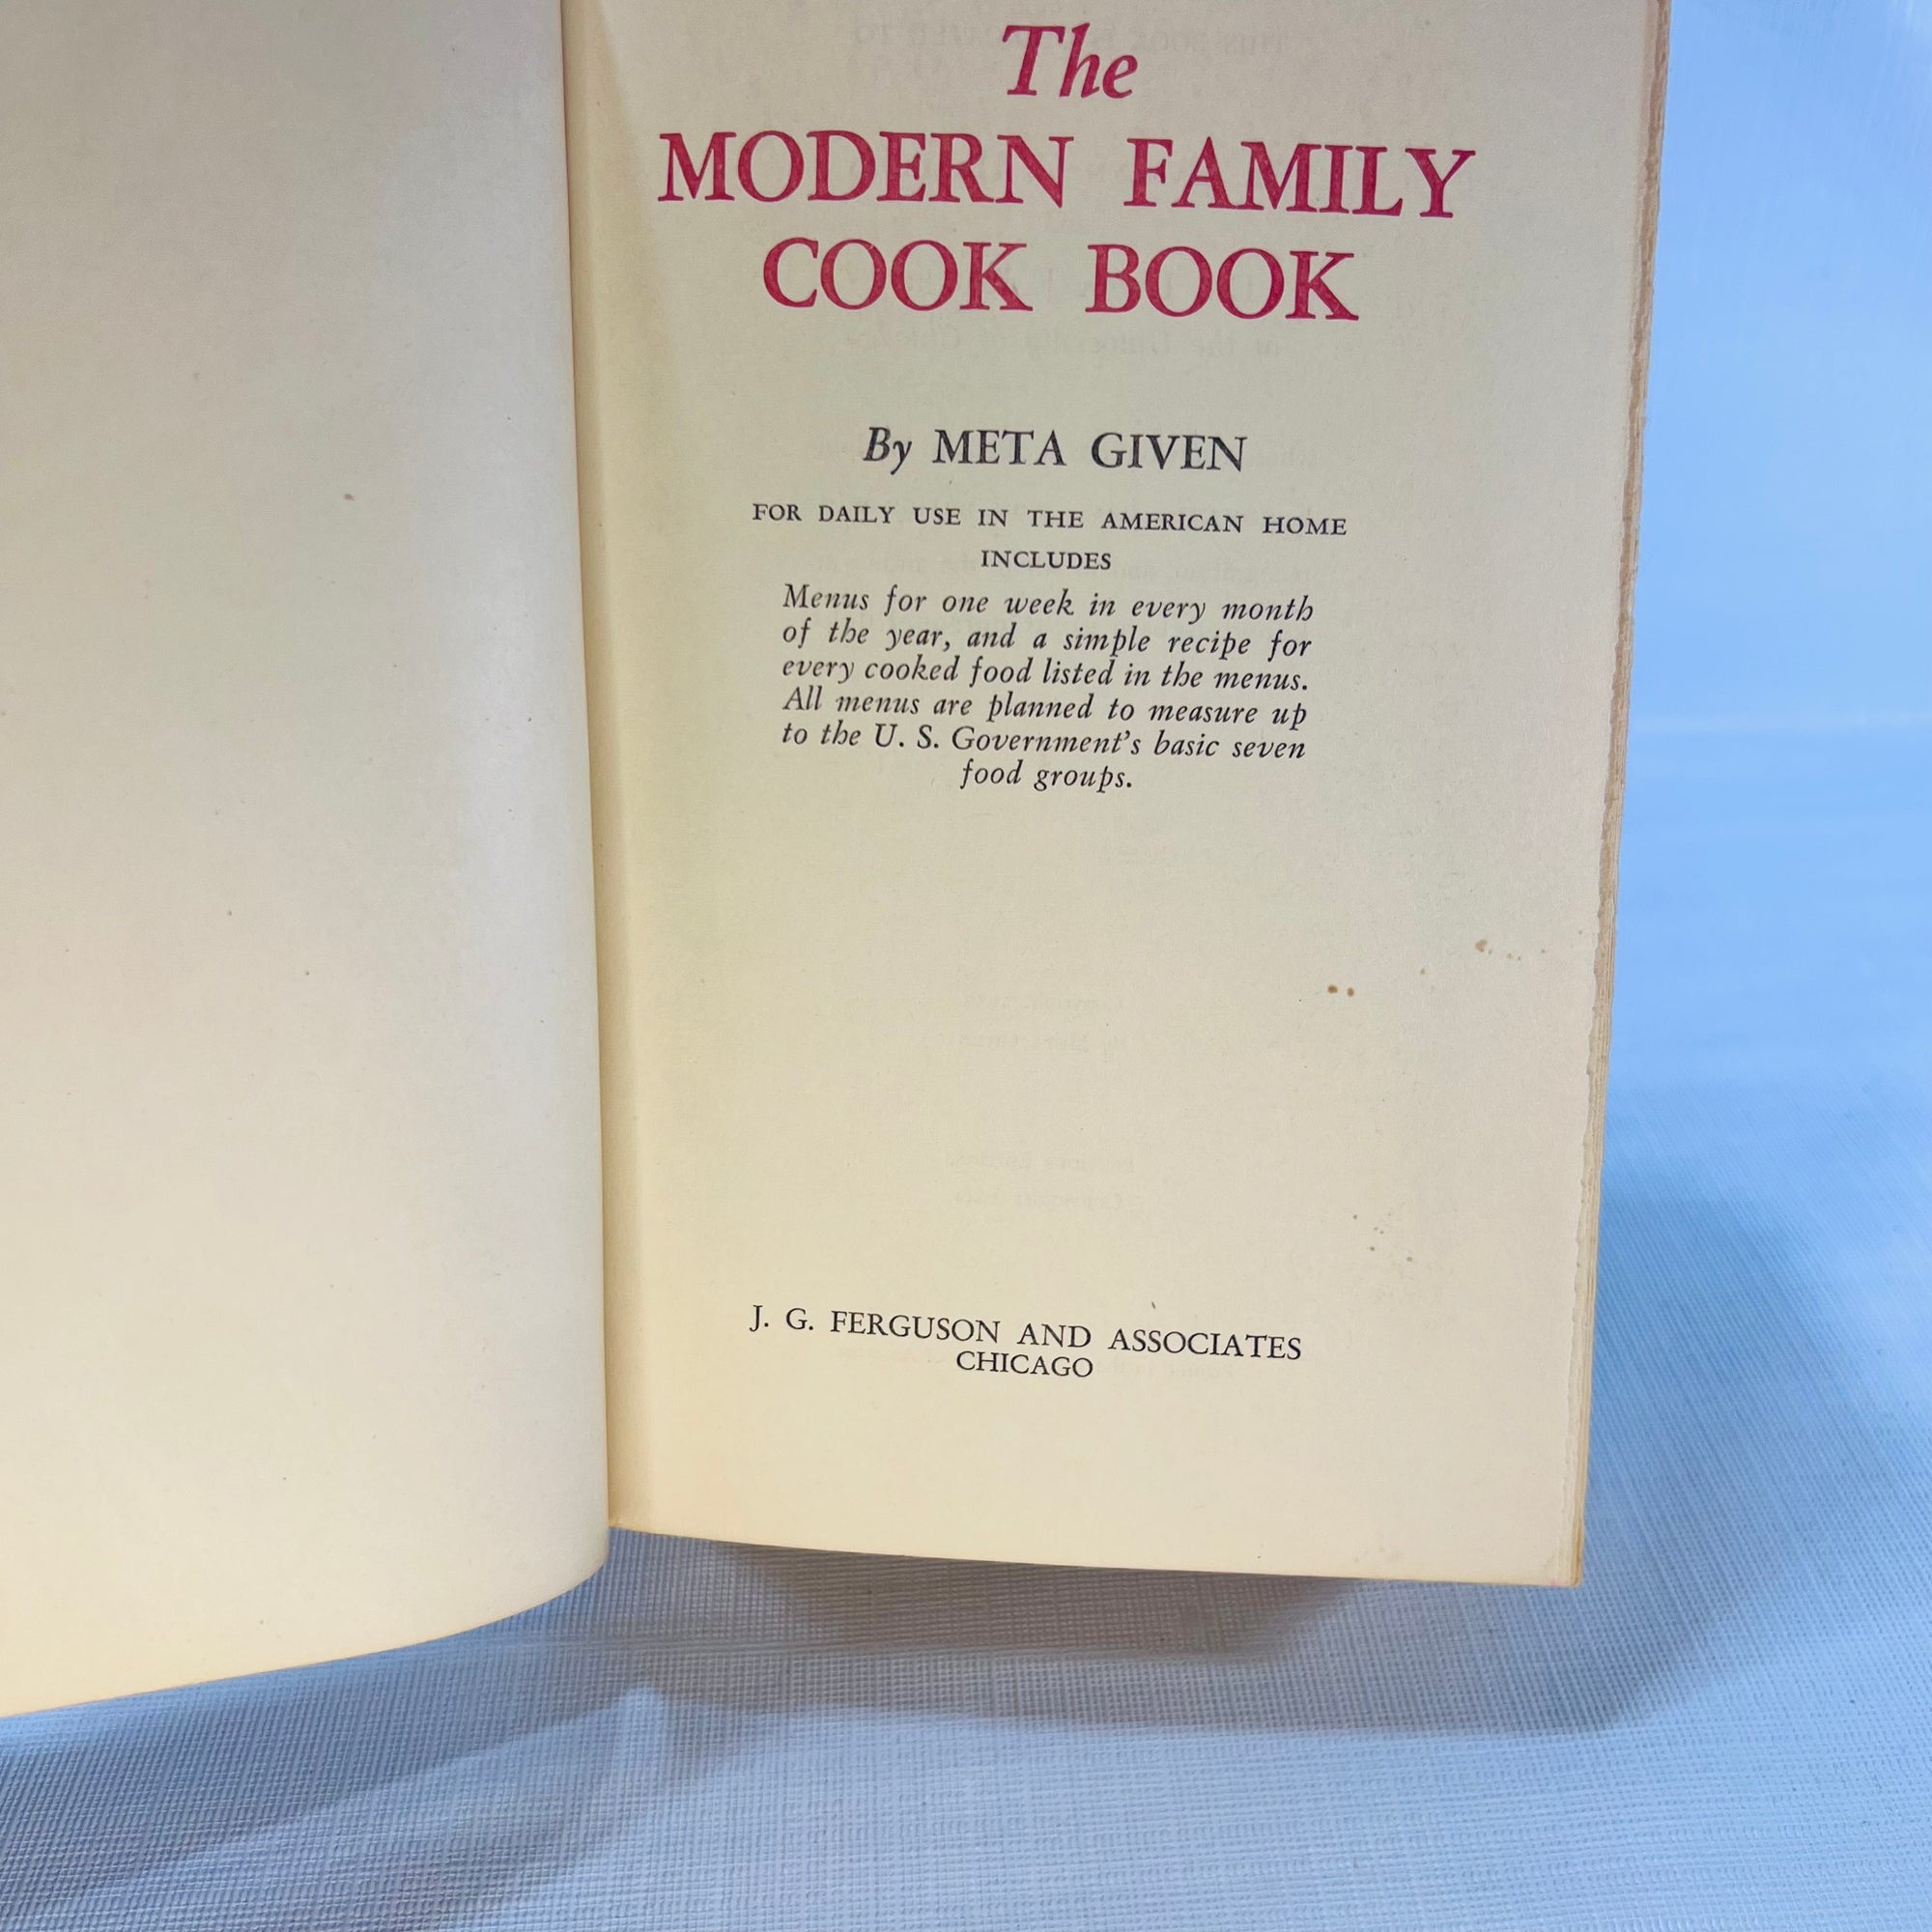 The Wizard Modern Family Cook Book by Meta Given 1953 published by J.G. Ferguson & Associates